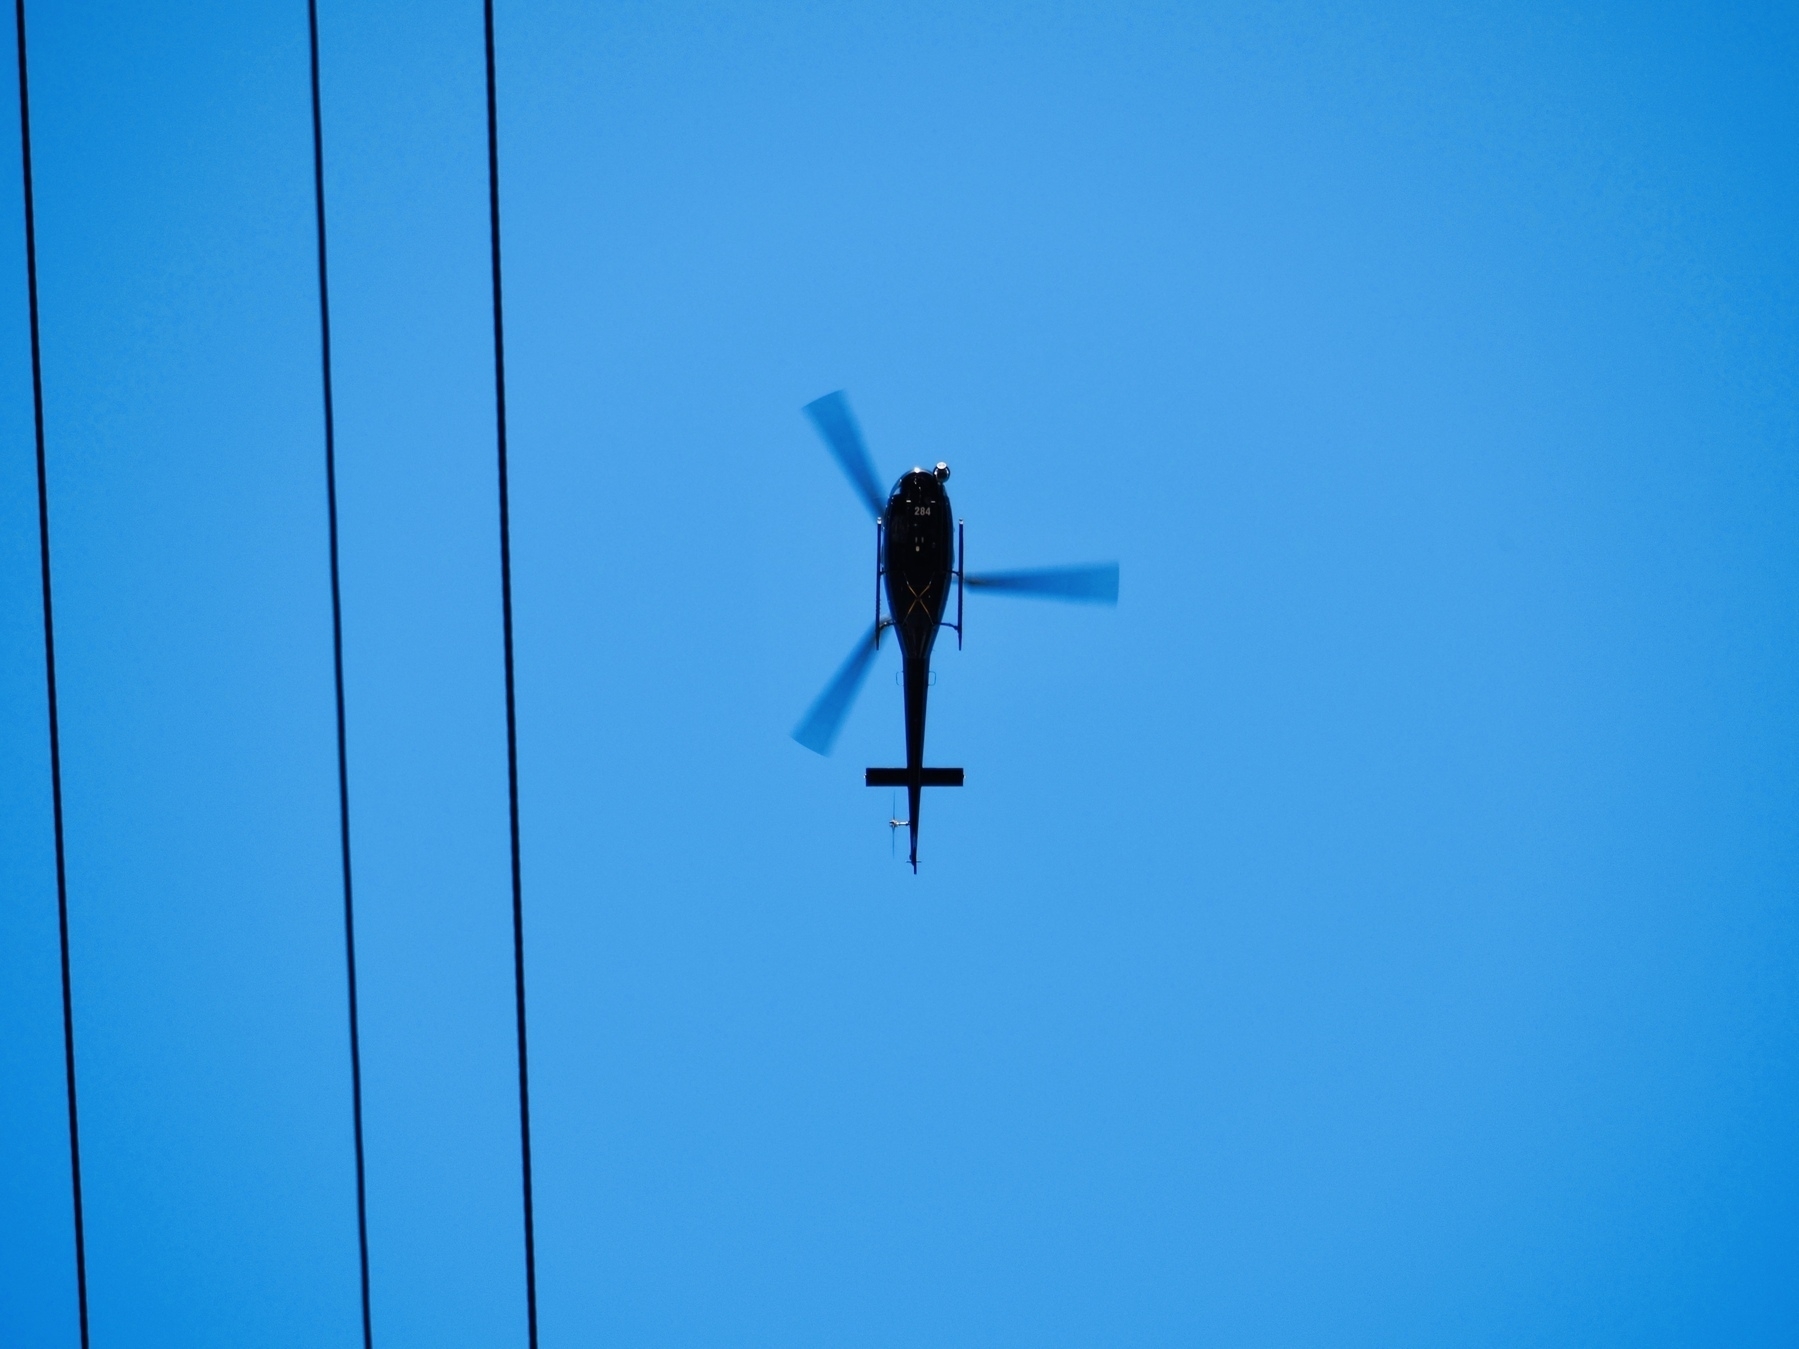 A helicopter flies overhead with power lines to the left of the frame.